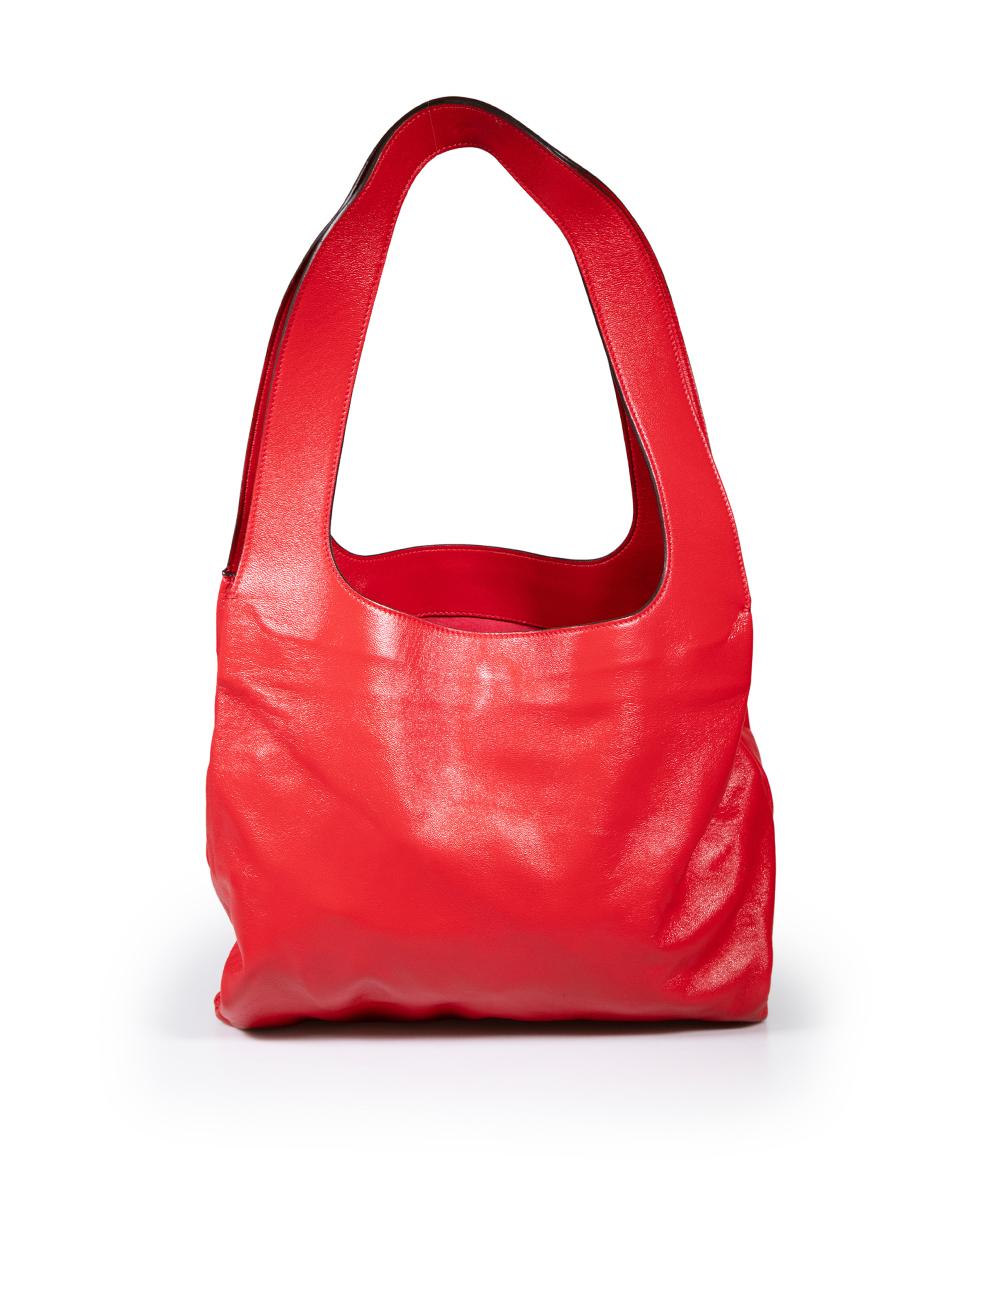 Tom Ford Red Leather Jennifer Leather Tote Bag In Good Condition For Sale In London, GB